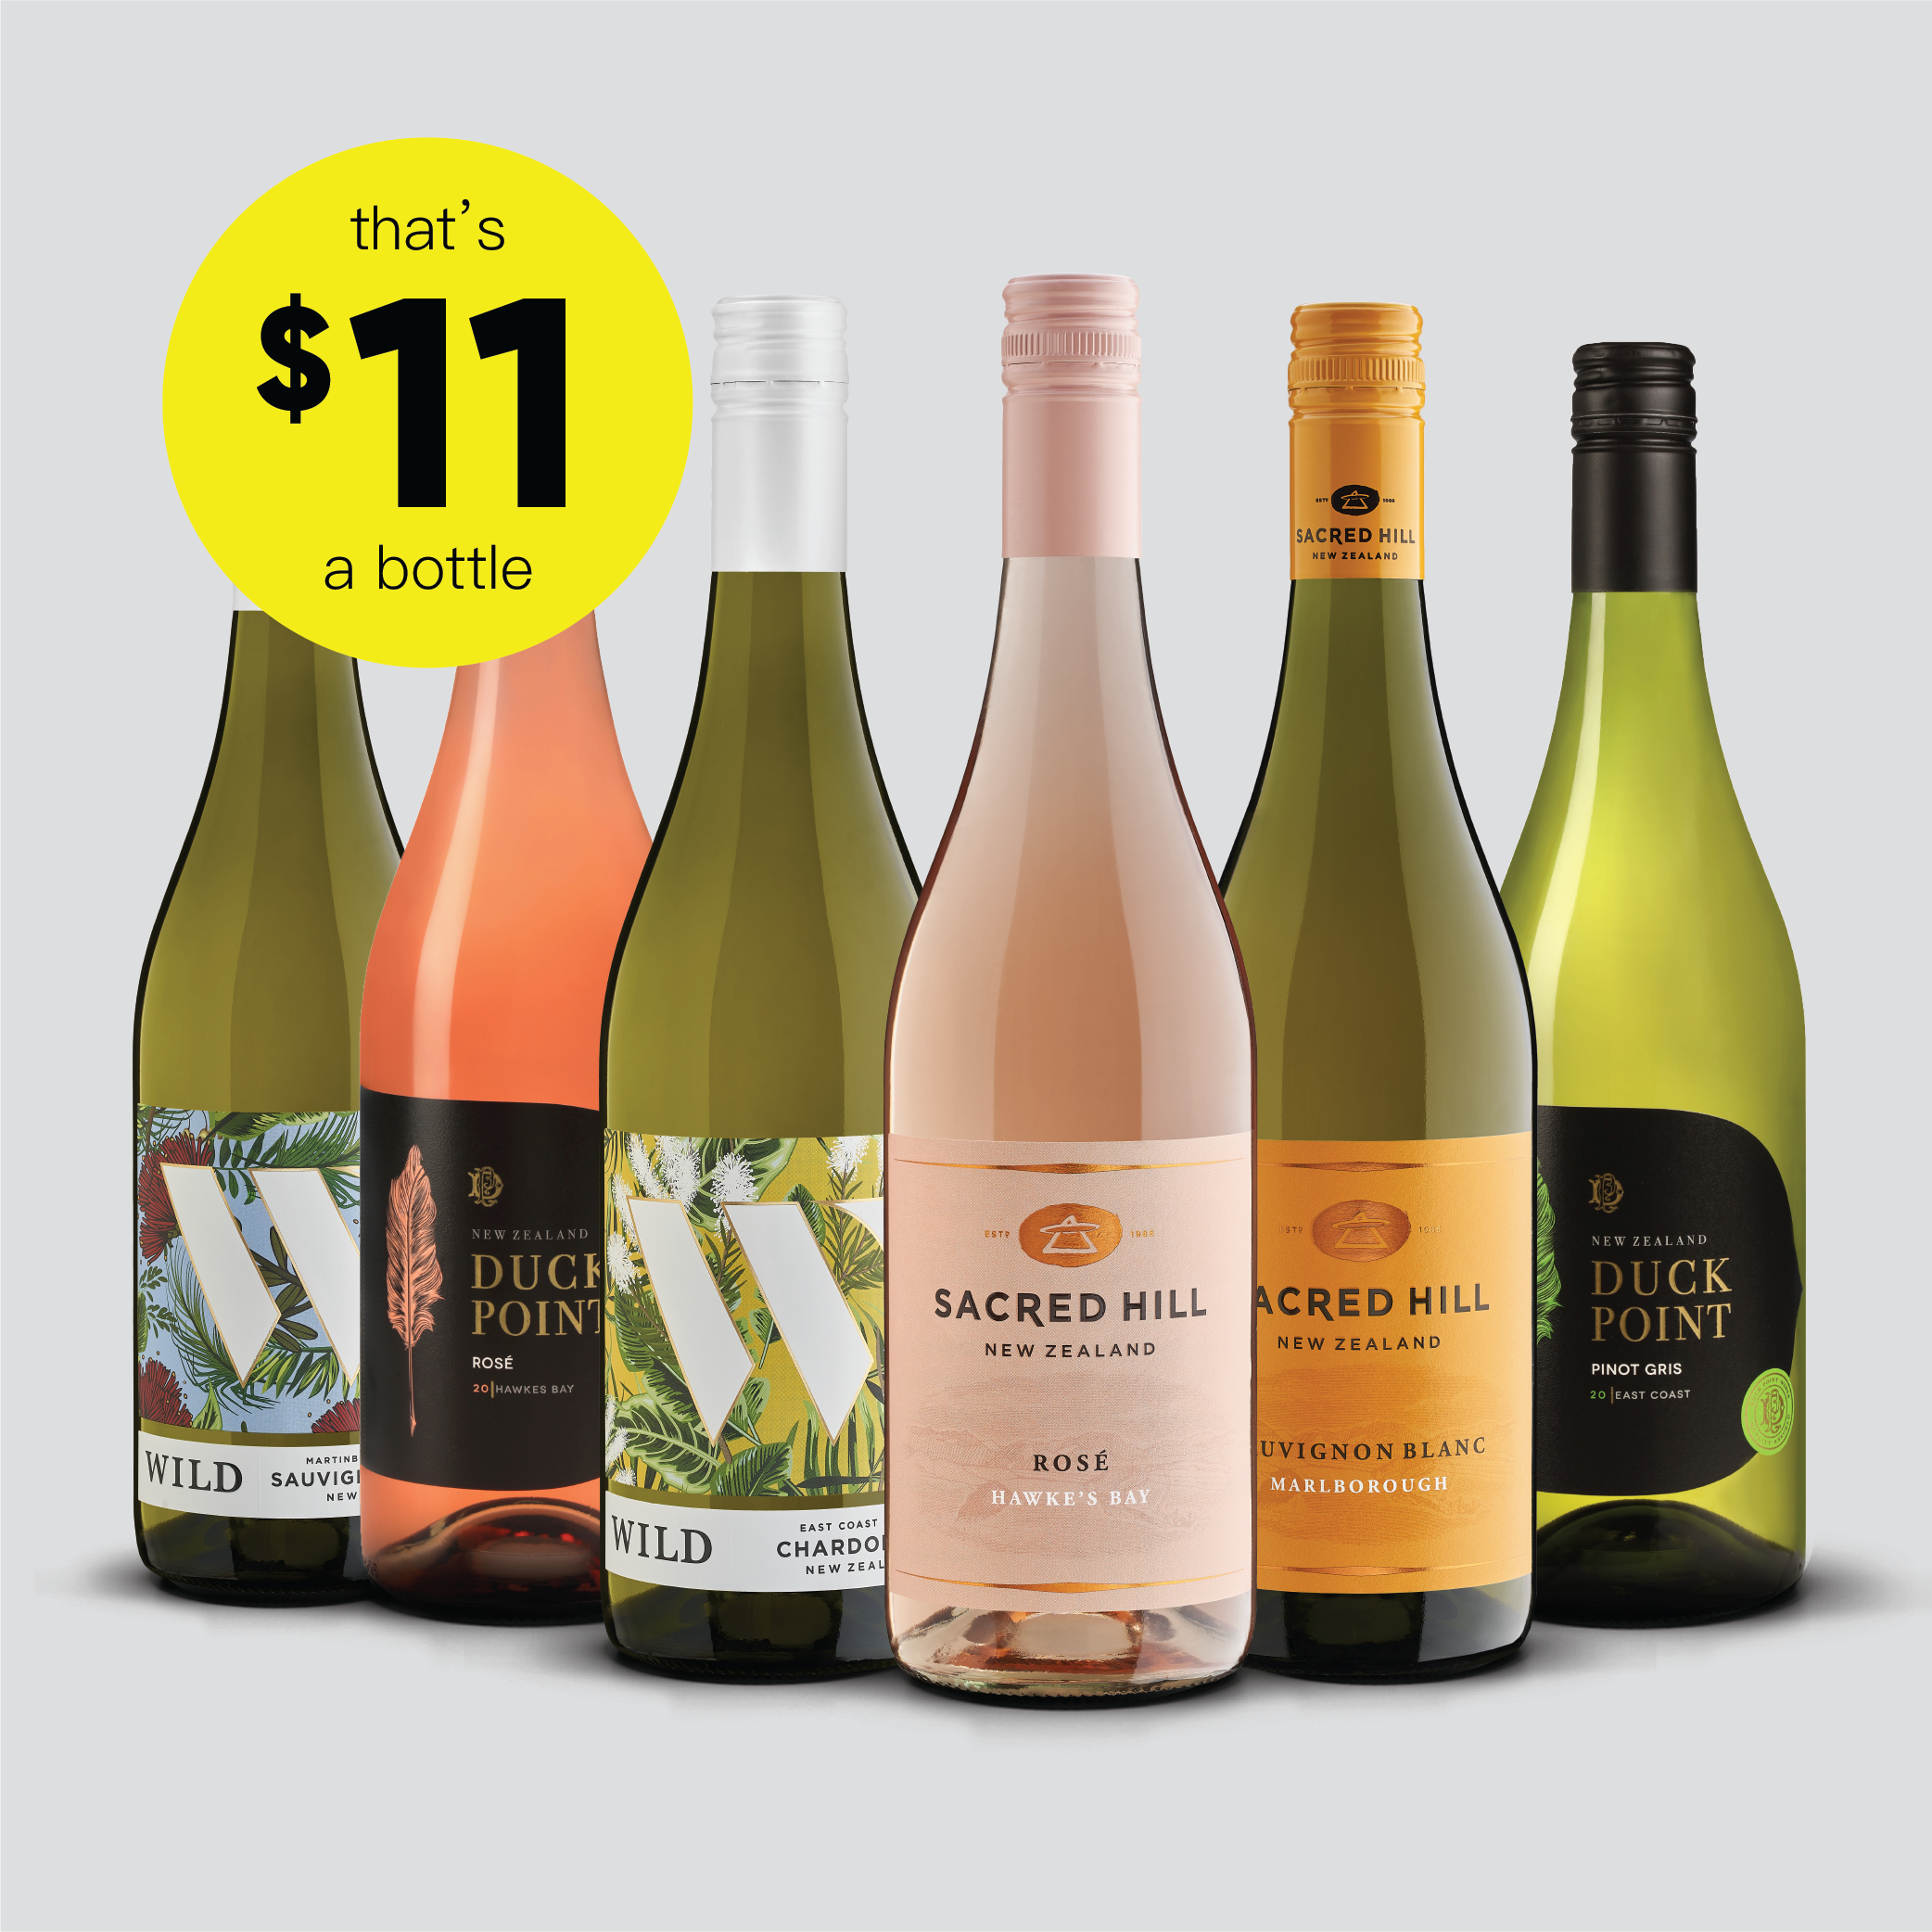 New Zealand White Wine and Rose Mixed Pack